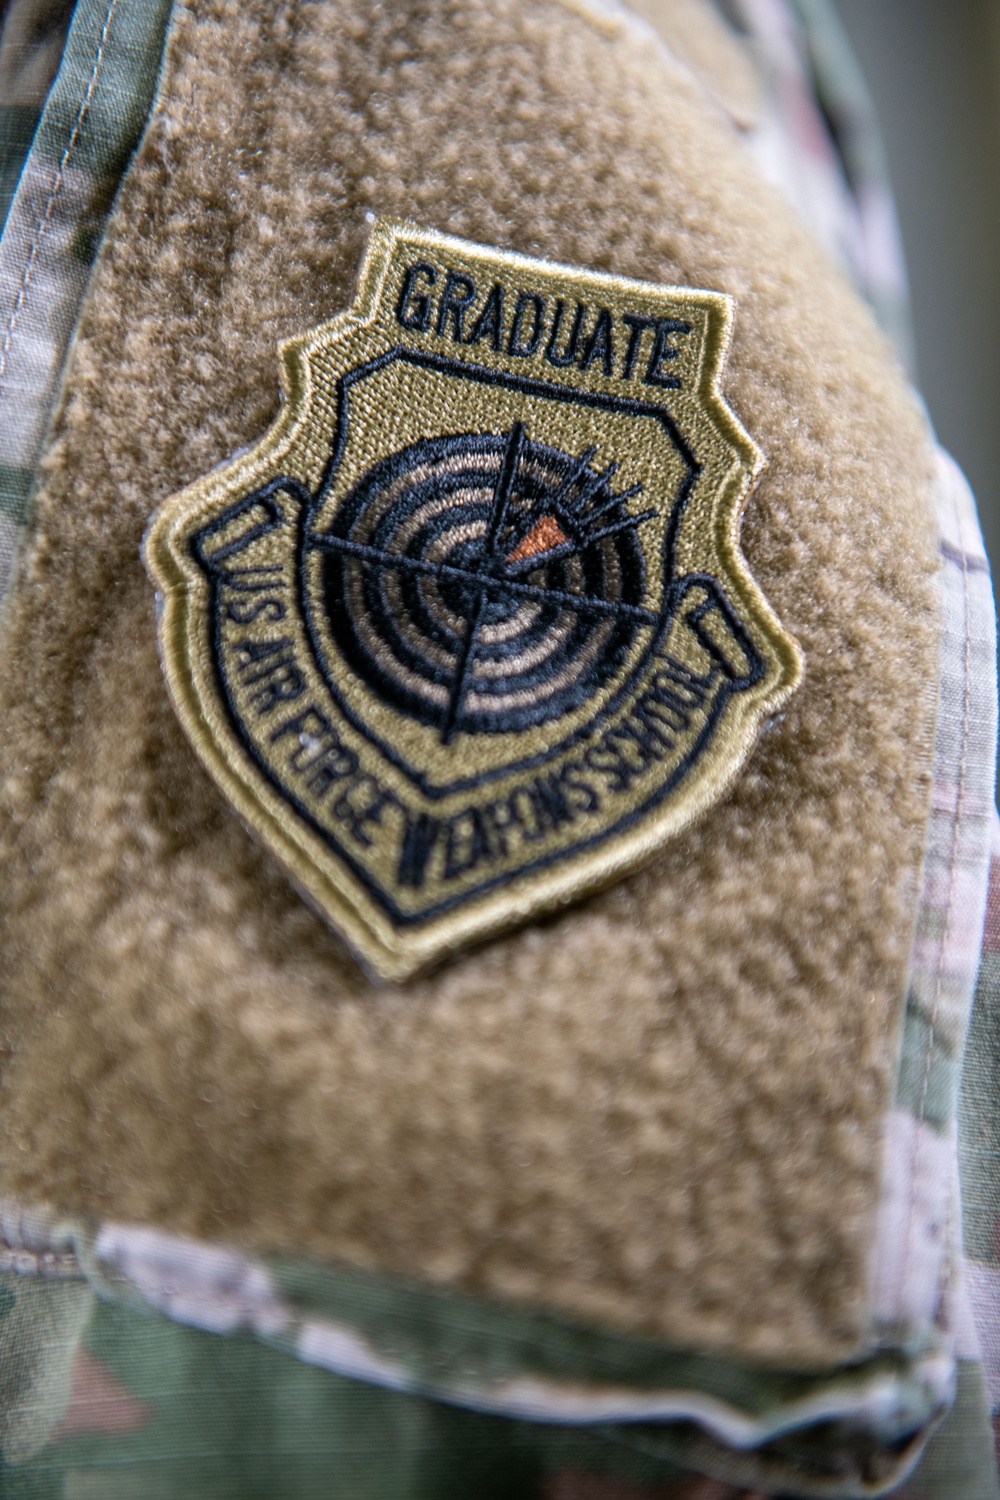 255th Air Control Squadron receives their first “Patch” in 28 years